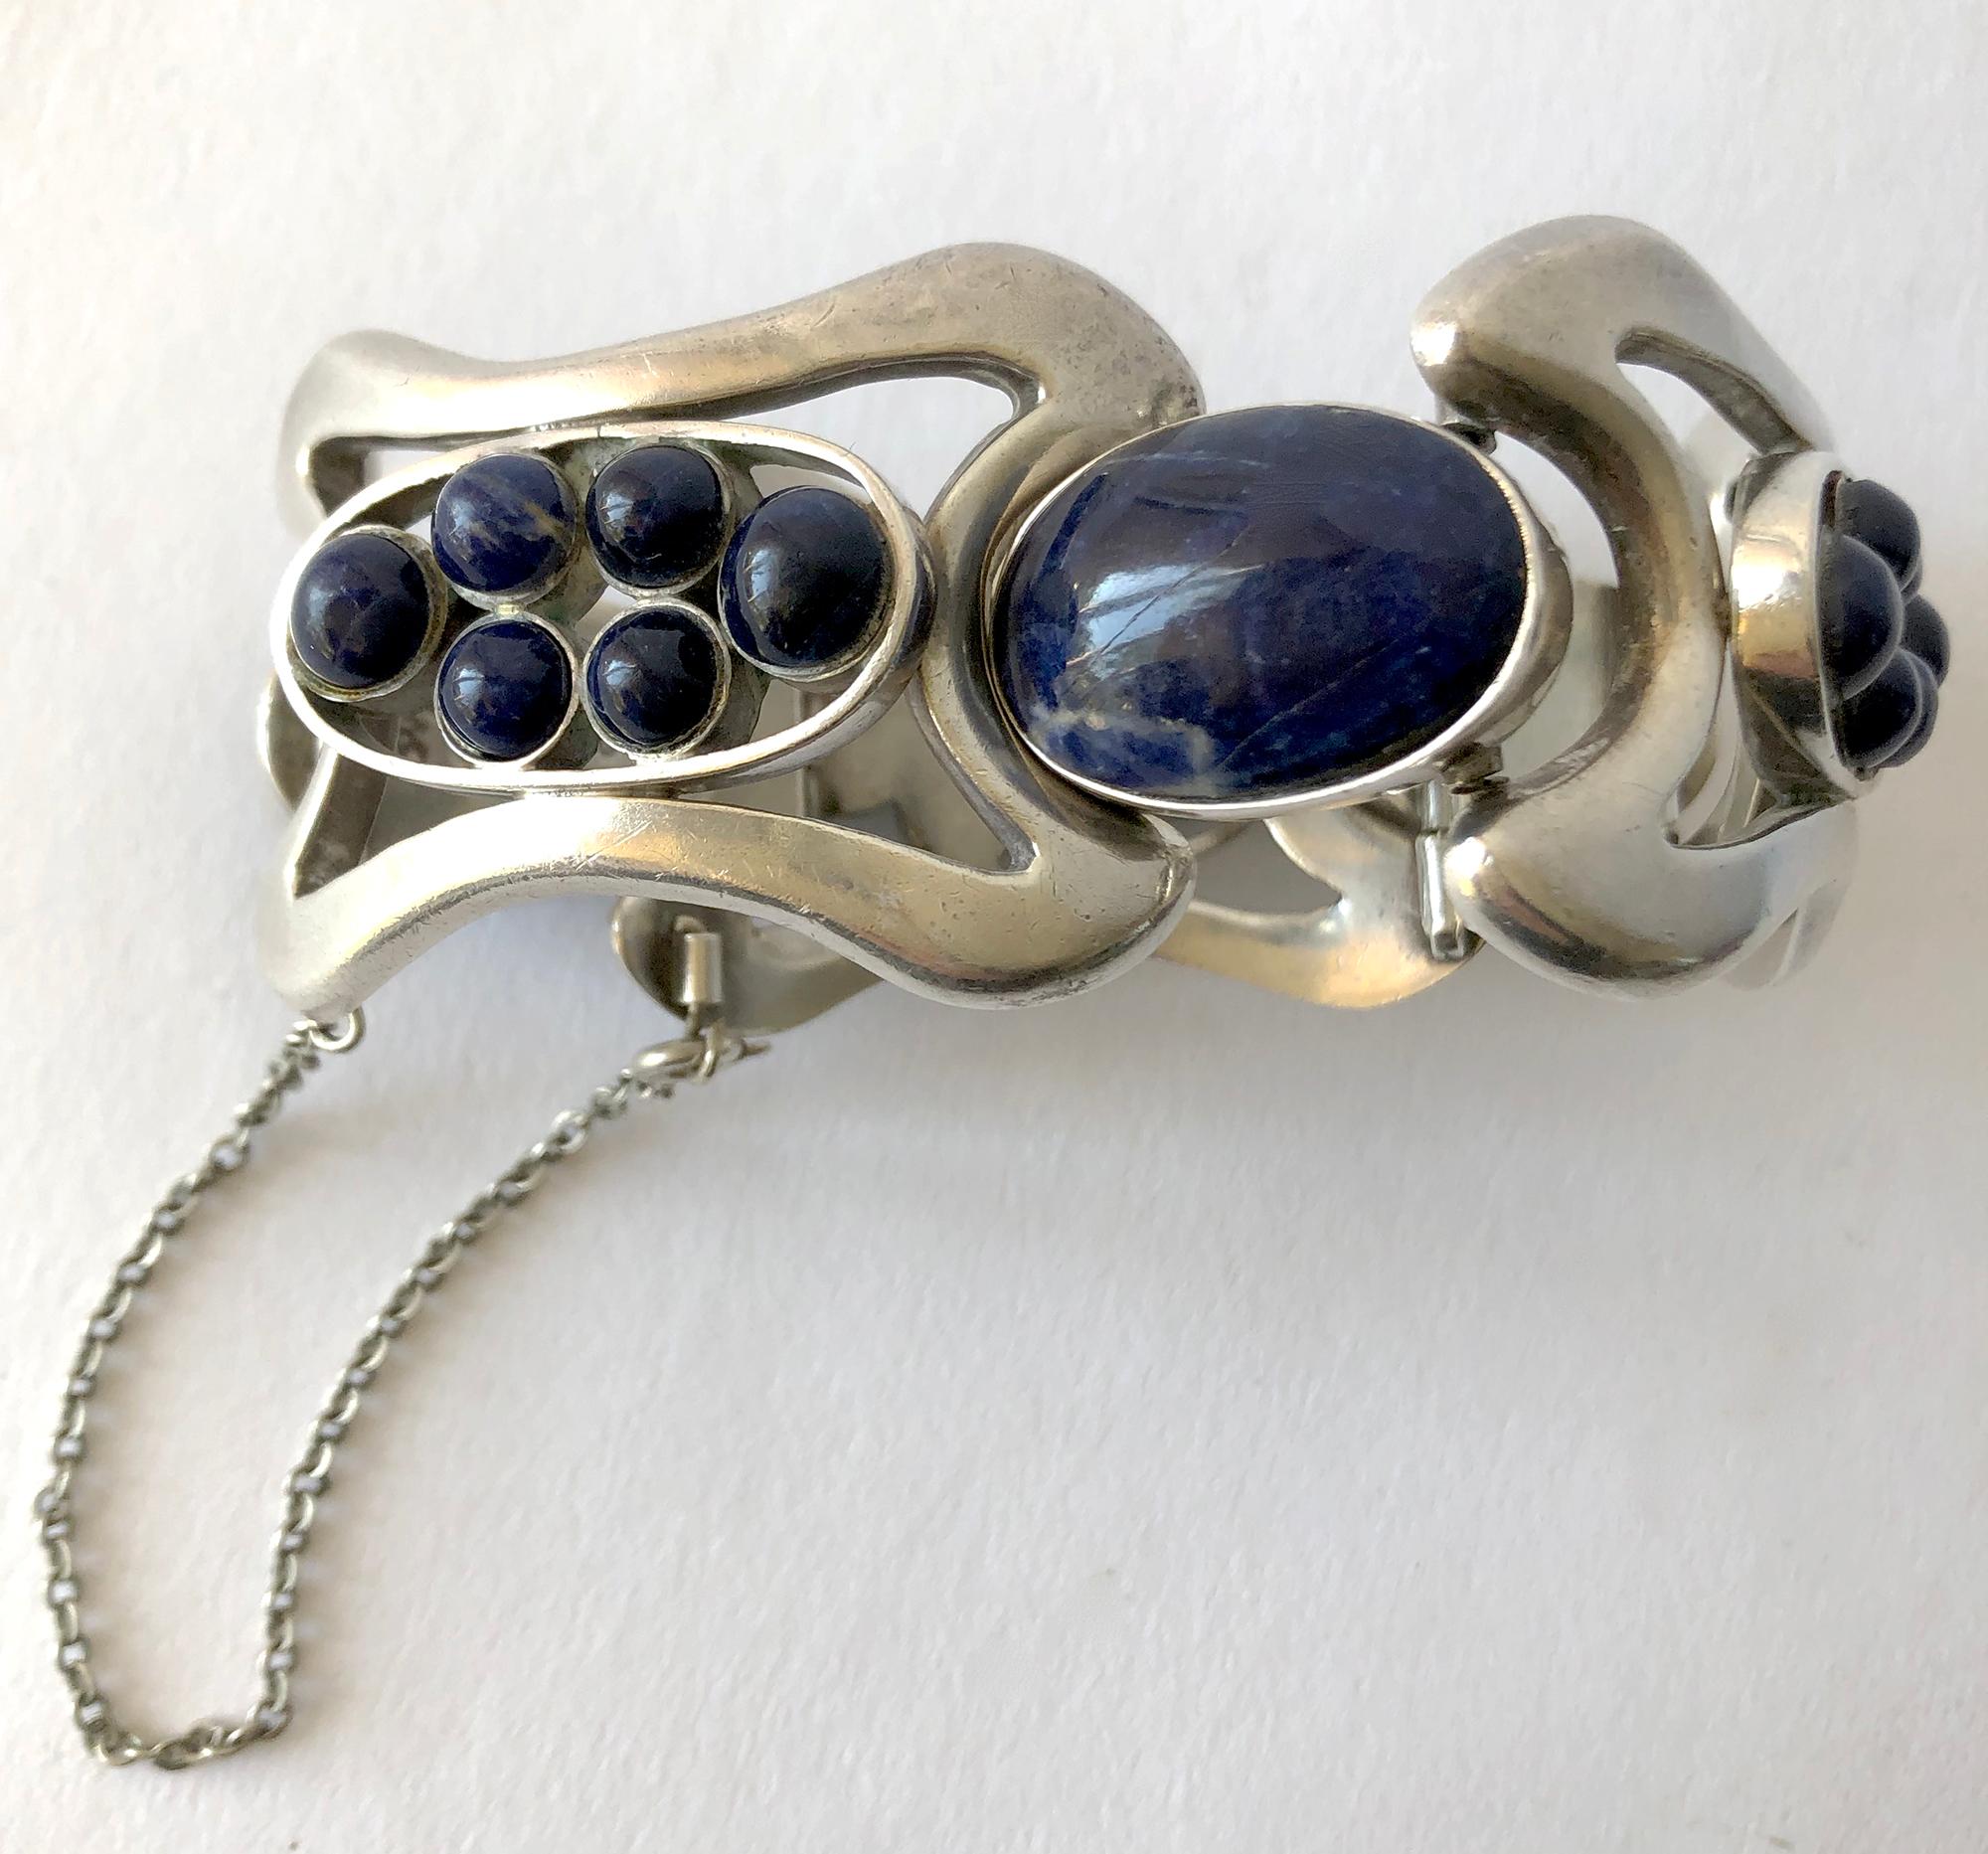 Substantial Mexican modernist sterling silver bracelet with sodalite cabochons created by Erika Hult de Corral of Puerto Vallarta, Mexico. Bracelet measures 1.25